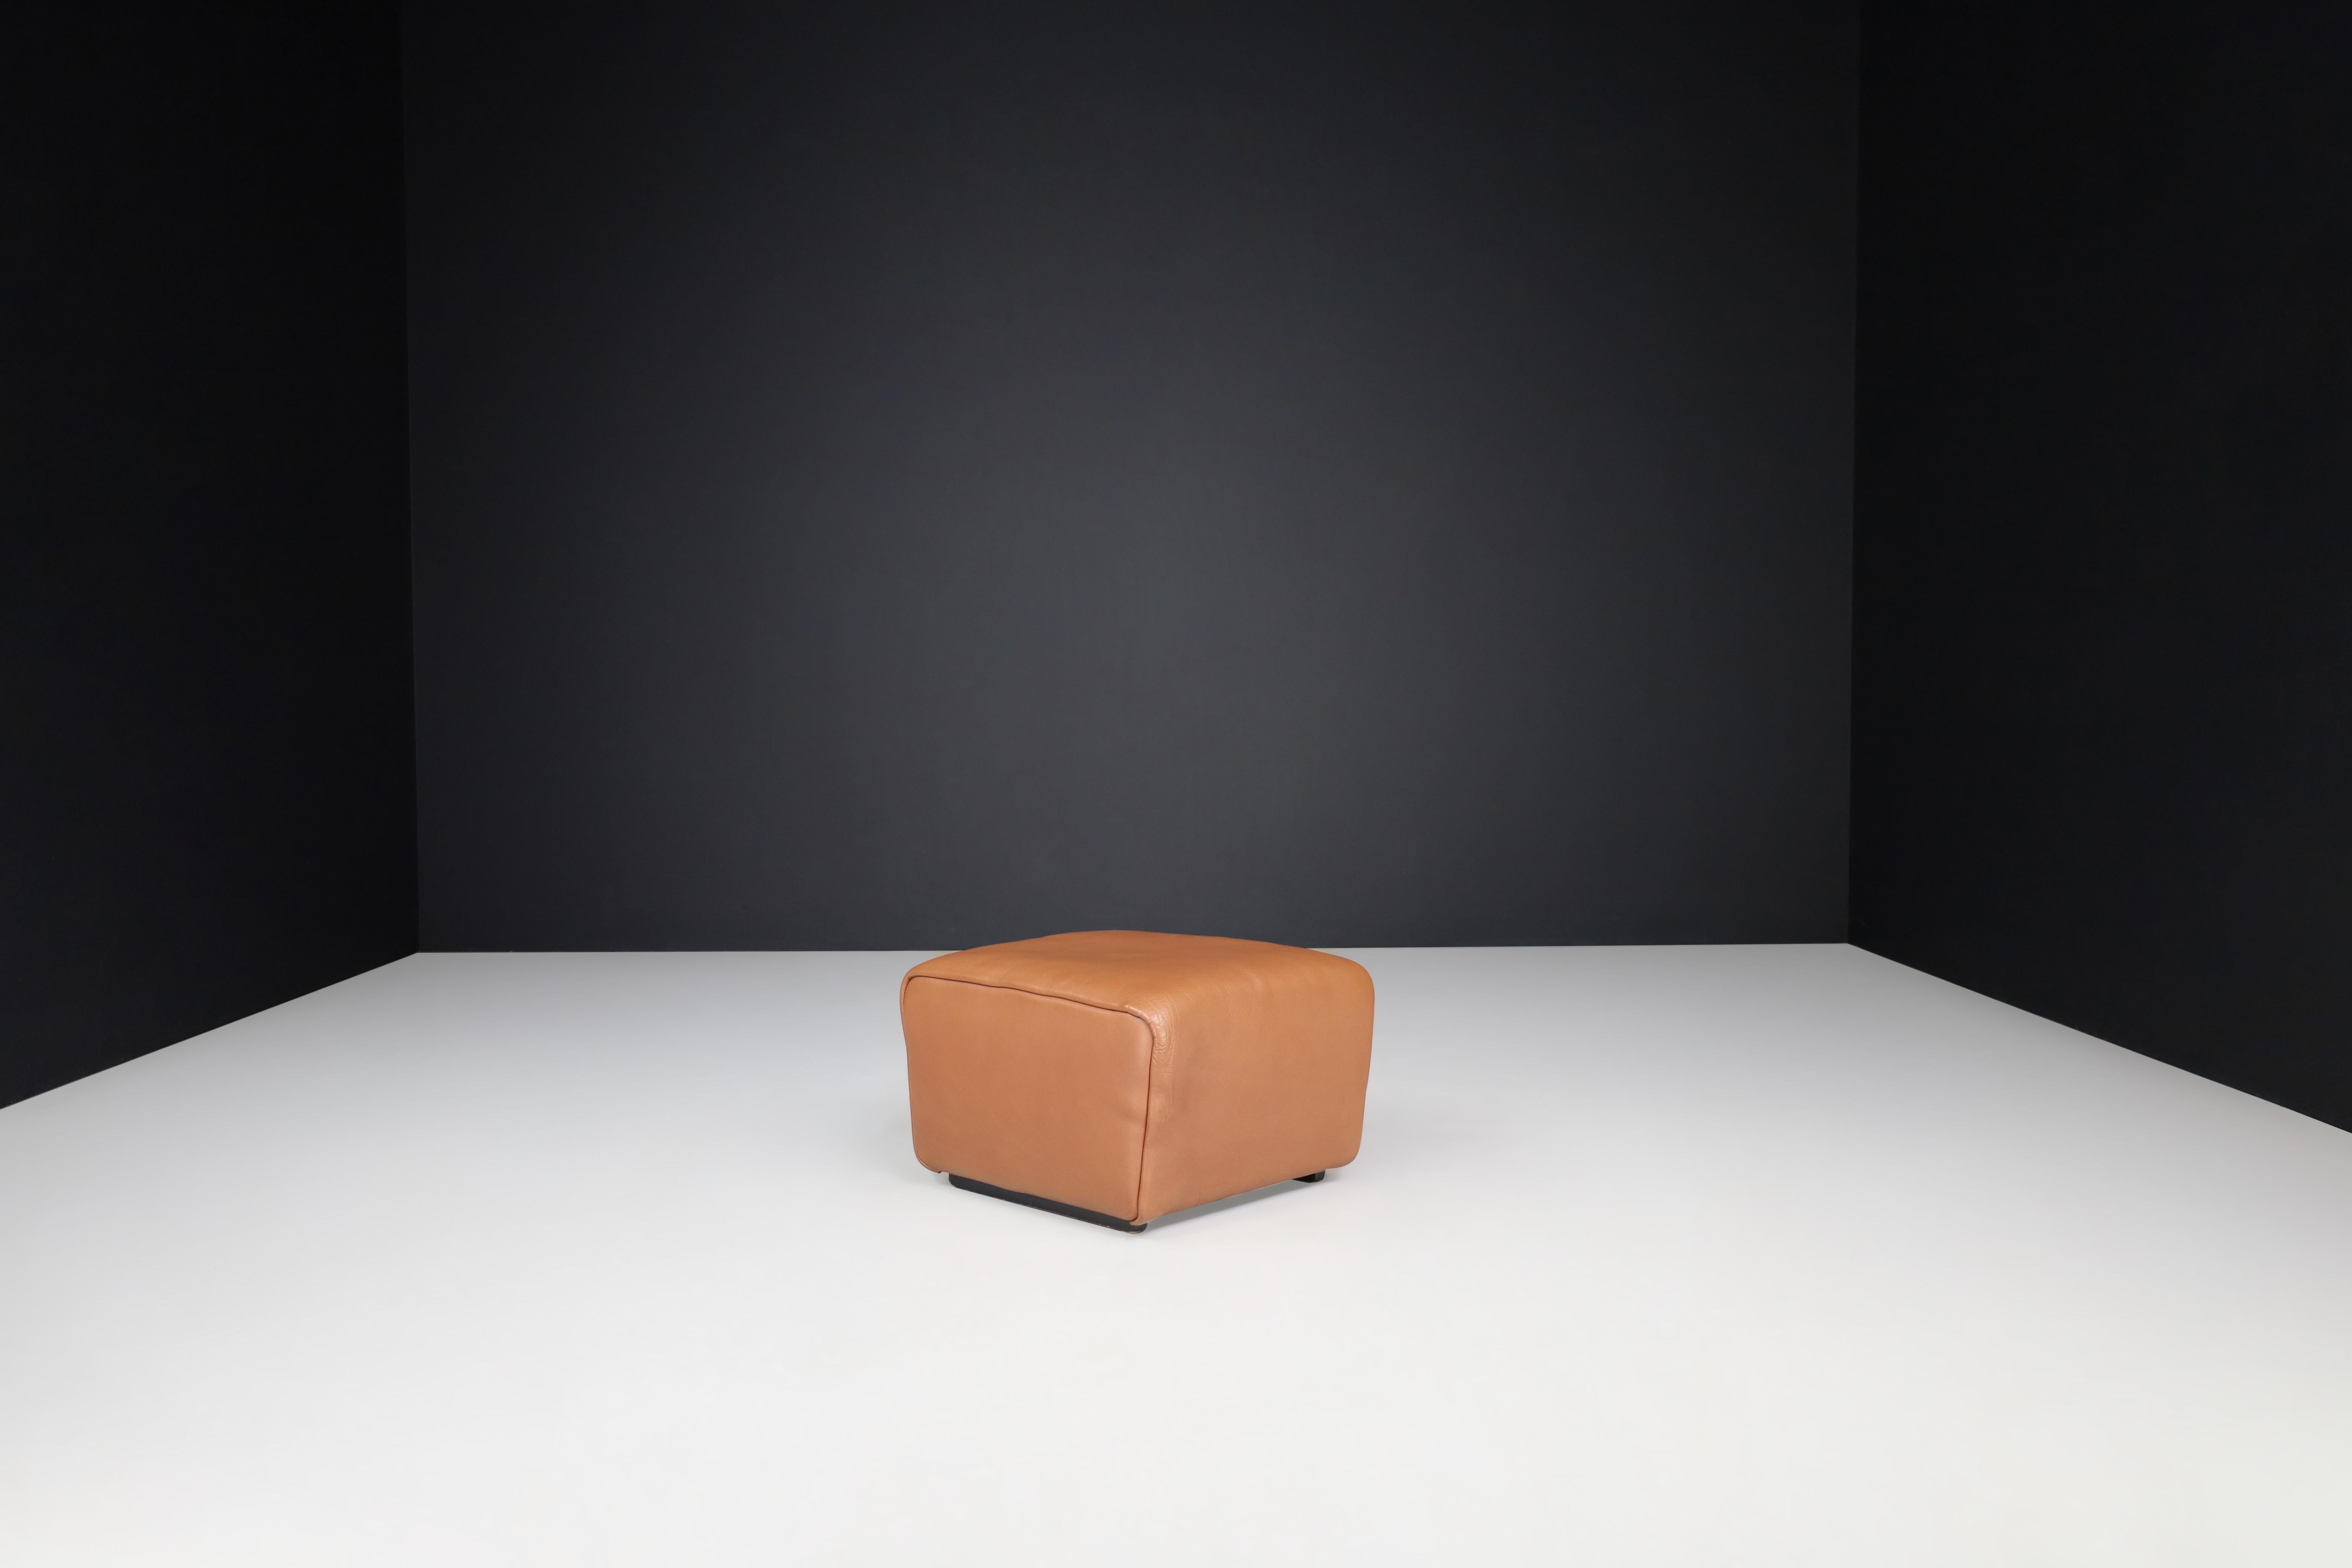 De Sede Pouf in Bufalo Leather, Switzerland, 1970s

This De Sede pouf is made of buffalo leather and was produced in Switzerland in the 1970s. Its sturdy wooden frame and thick hand-stitched leather upholstery provide ultimate comfort and quality.